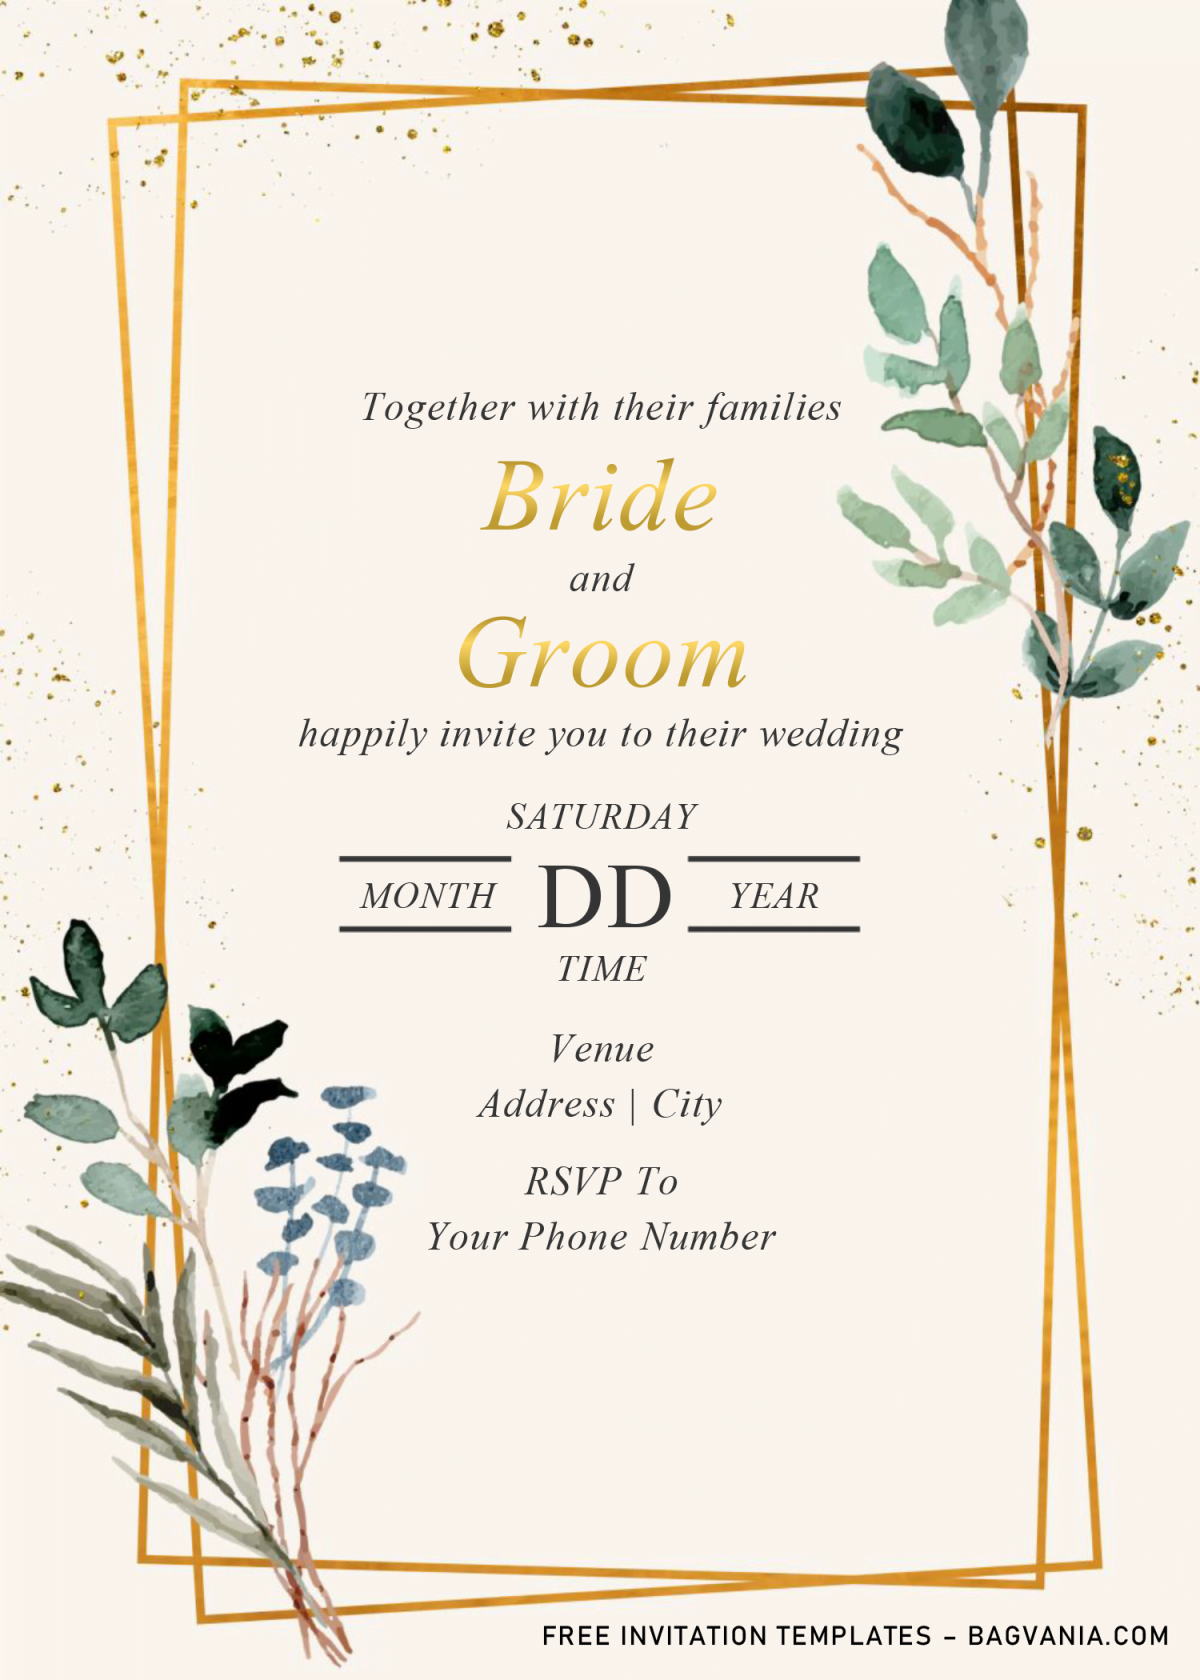 Floral & Geometric Invitation Templates - Editable With MS Word and has gold text frame